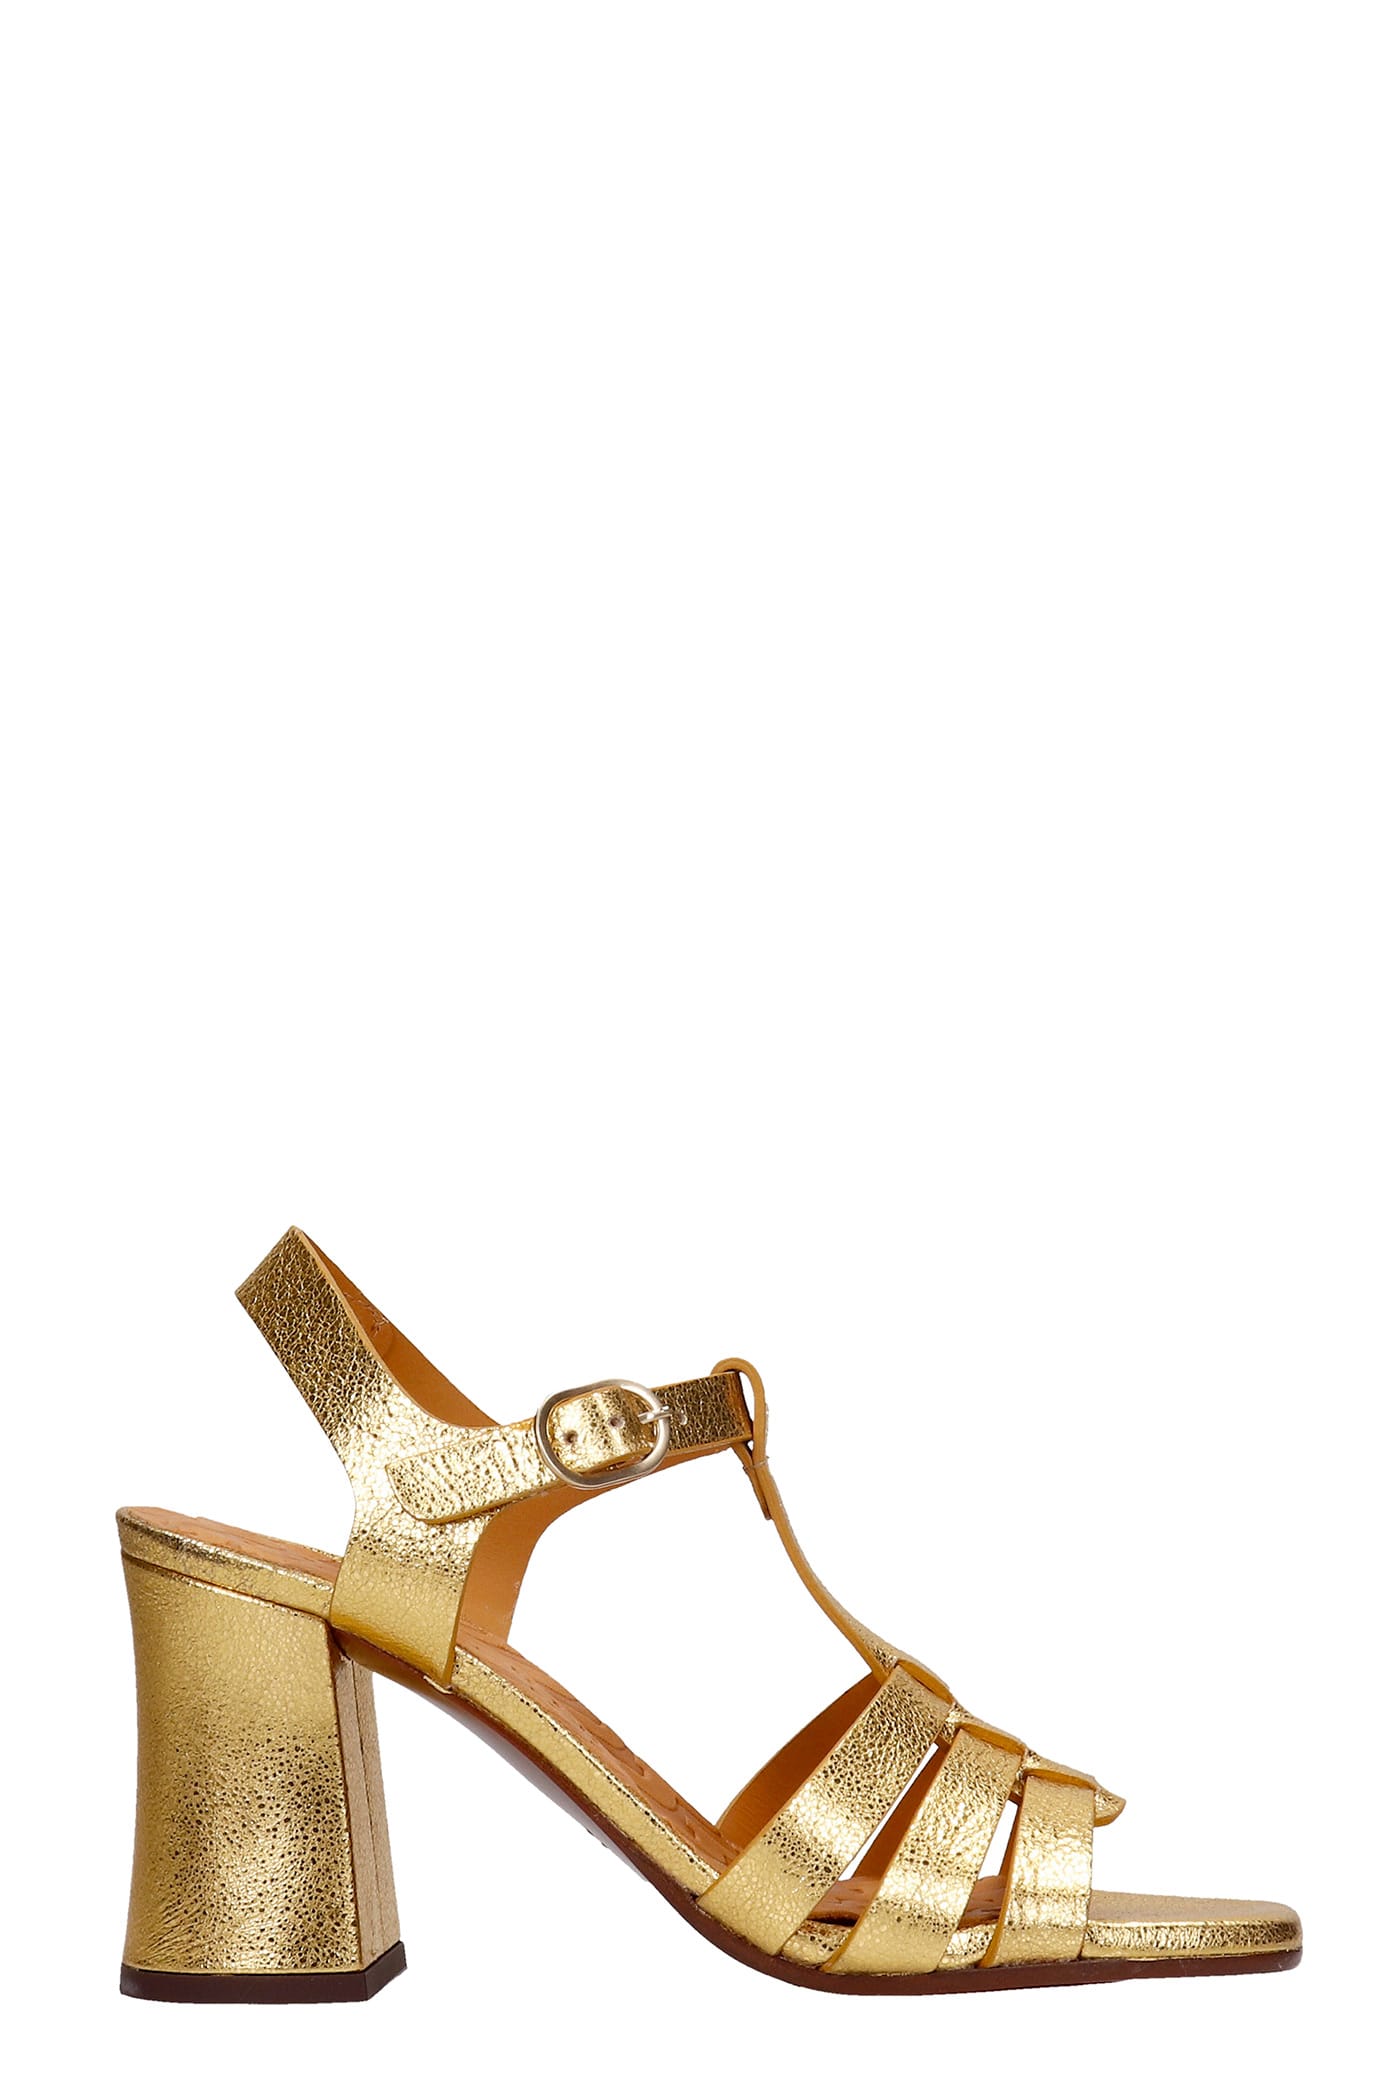 CHIE MIHARA PAXI SANDALS IN GOLD LEATHER,PAXI